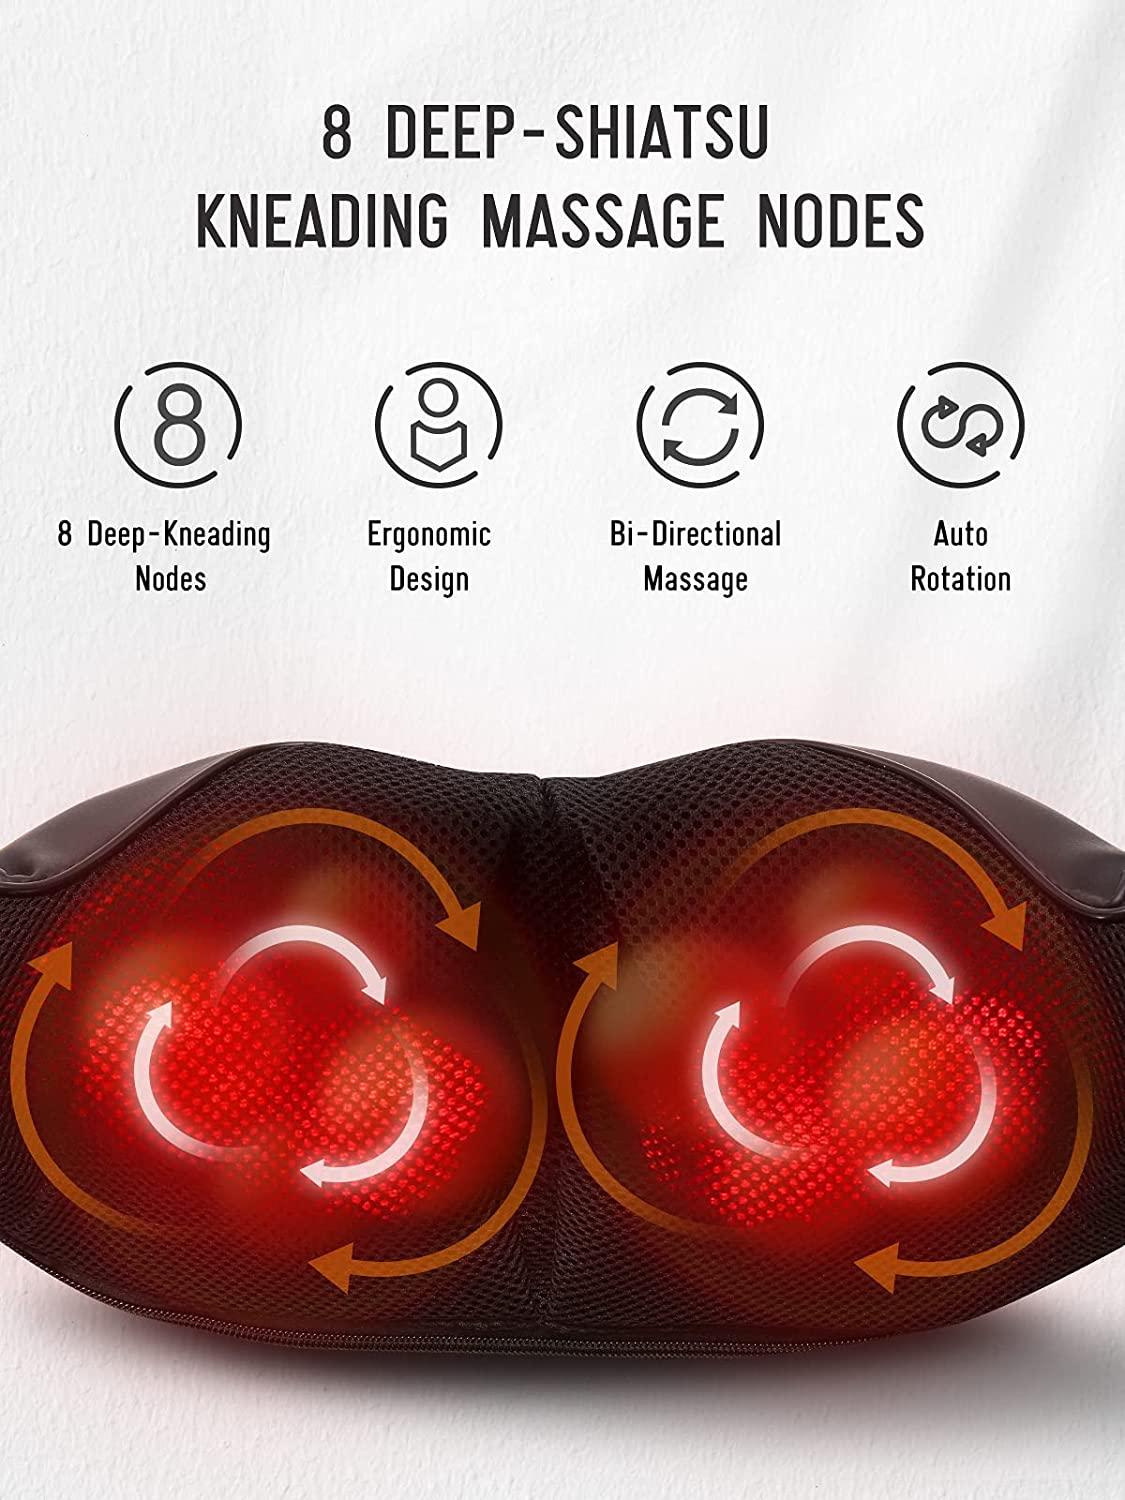 Shiatsu Back Neck and Shoulder Massager with Adjustable Heat and